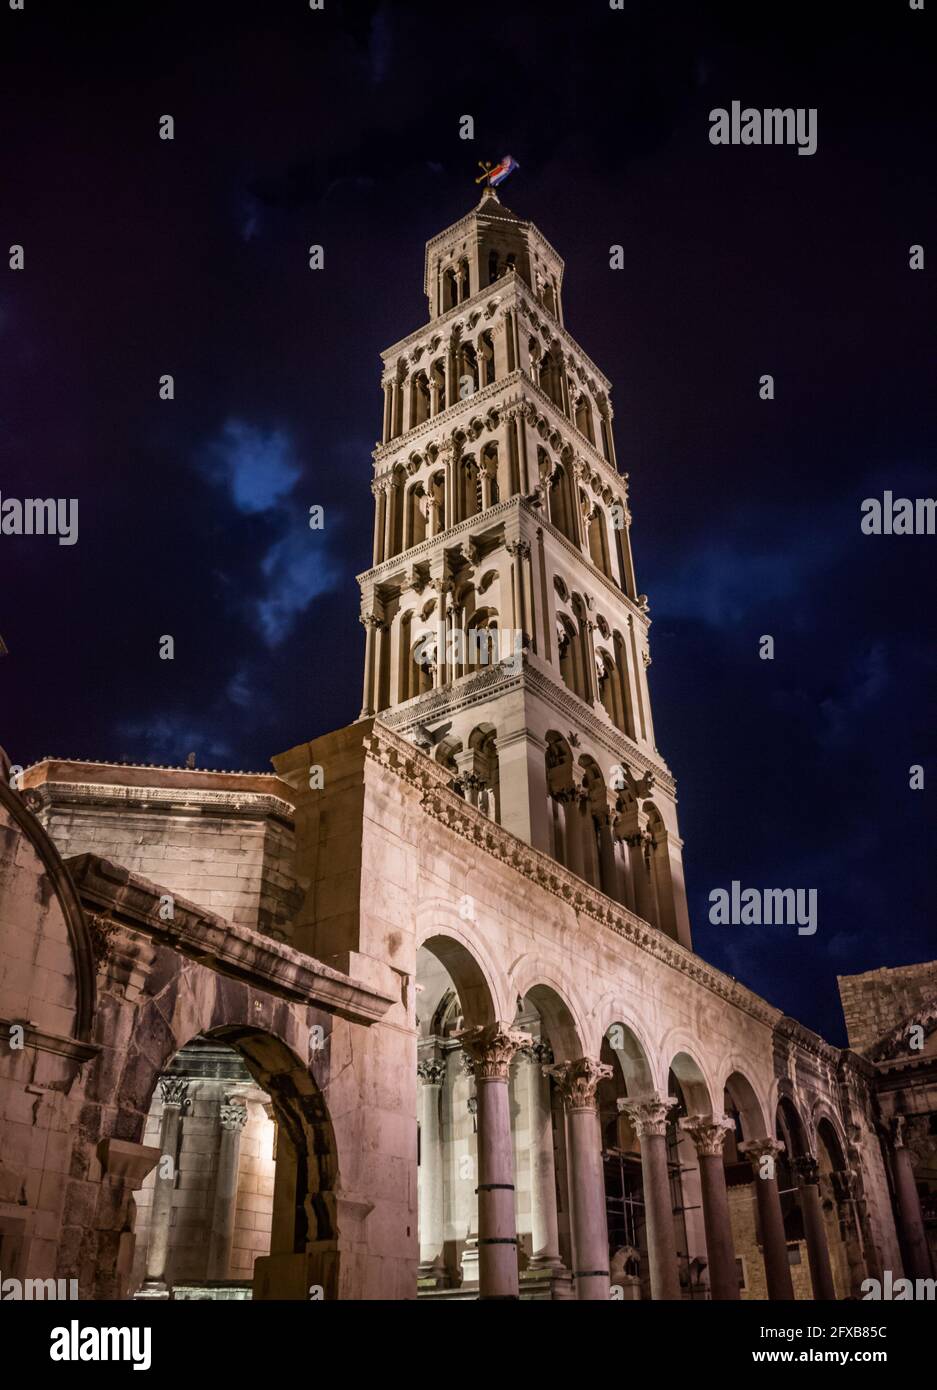 The Bell tower of the Cathedral of St. Dominius overlooking the Diocletian Palace in old town Split, the second largest city in Croatia Stock Photo